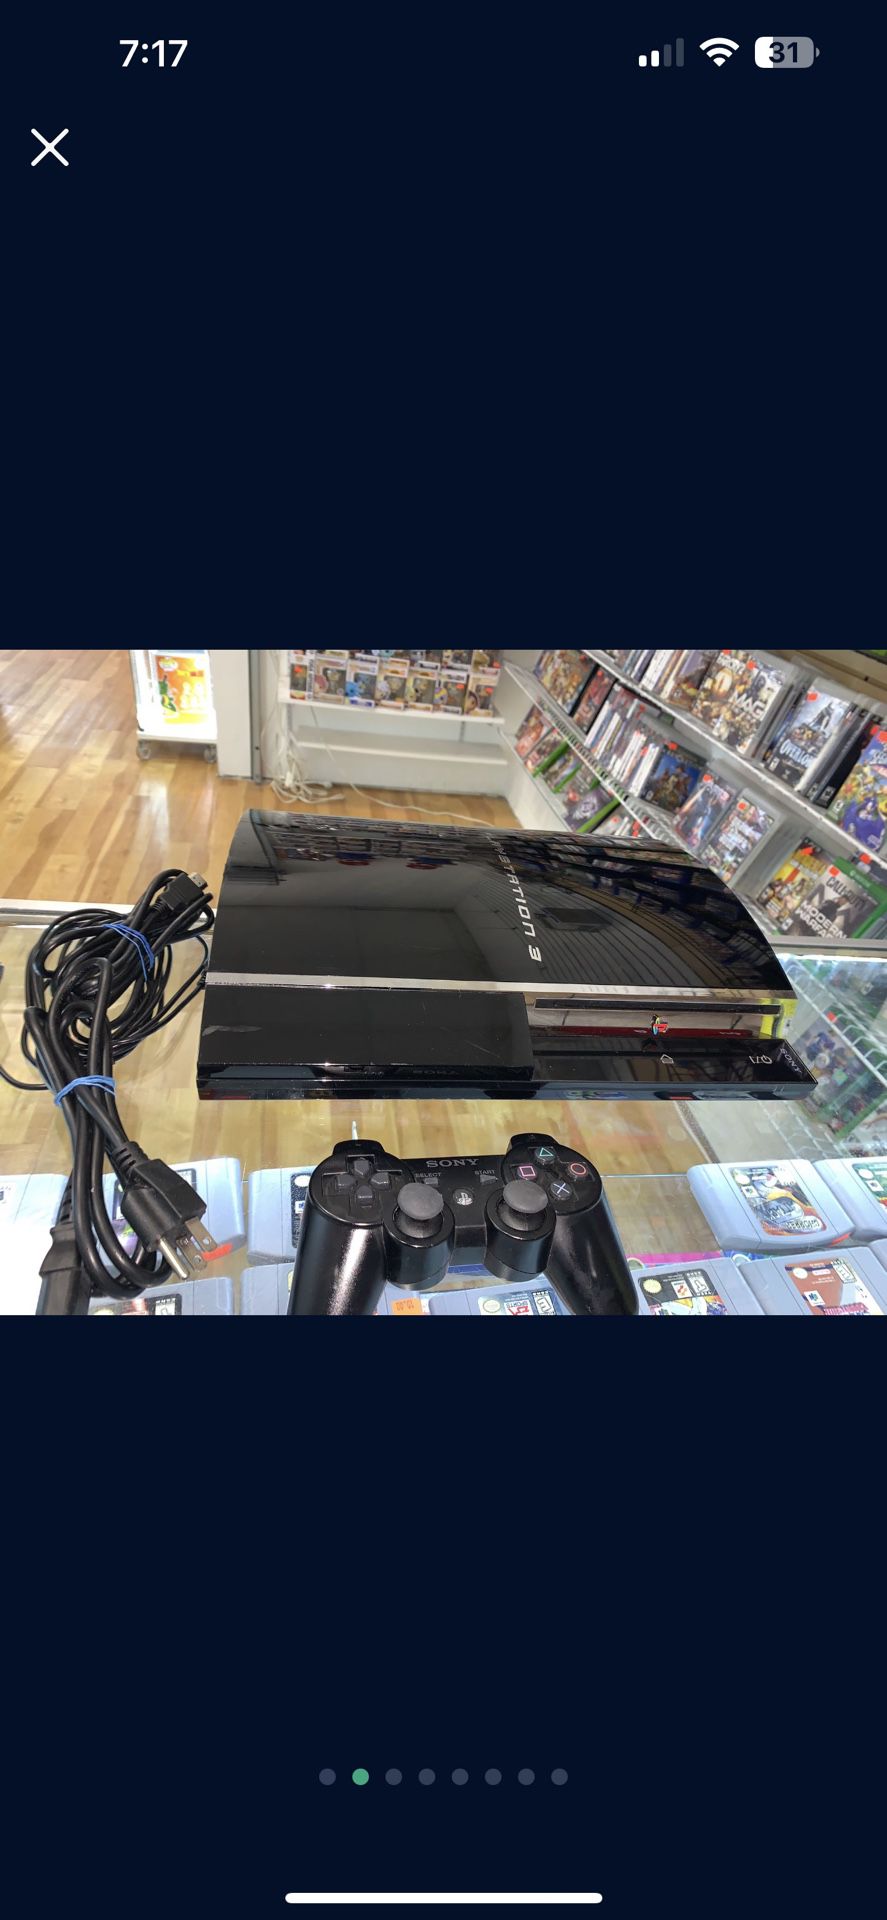 Sony PlayStation 3 Backwards Compatibility 80GB ( Works Great , Clean And Tested ) 